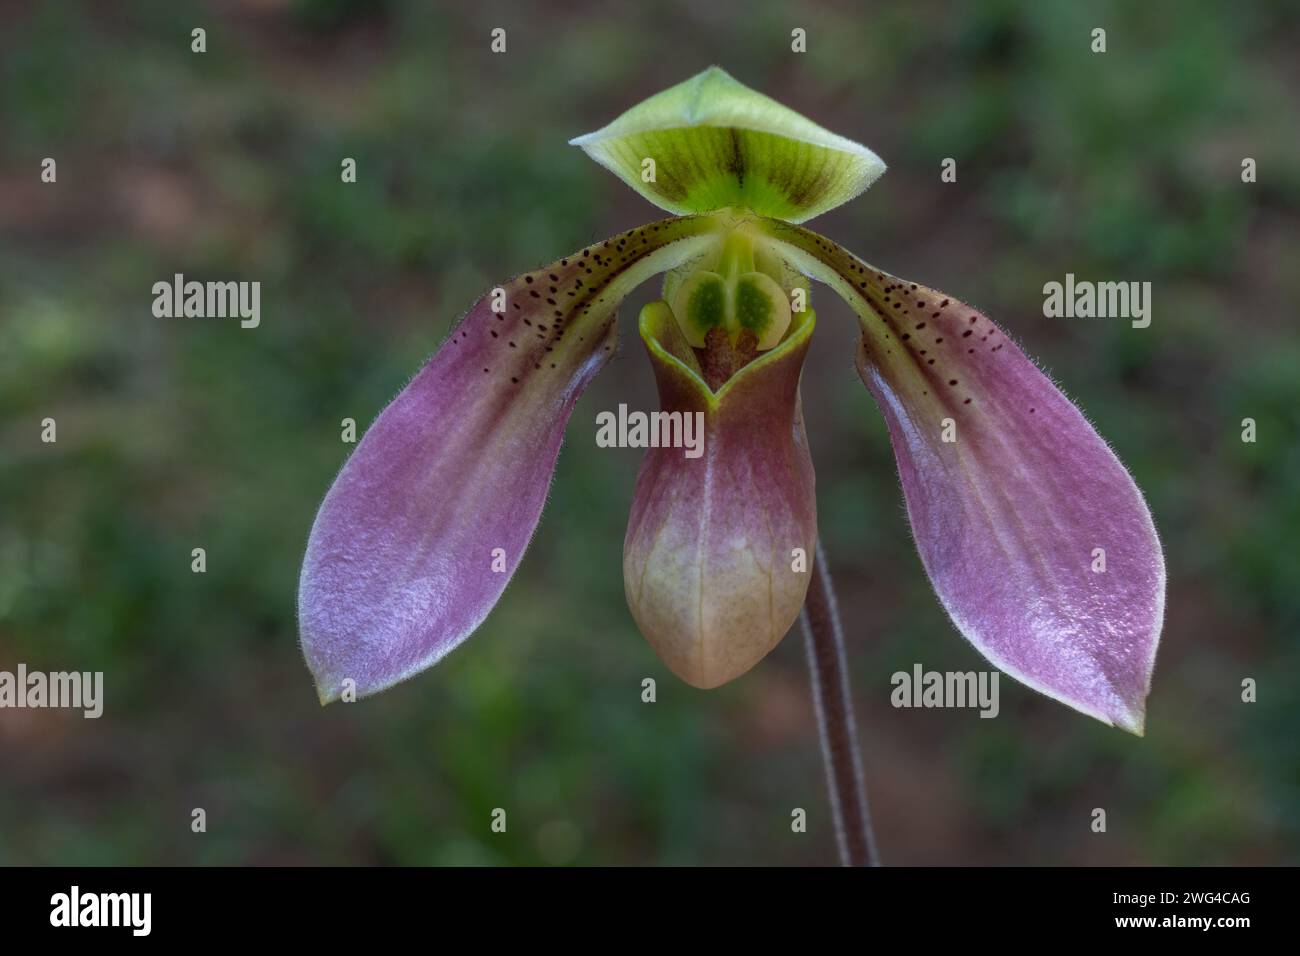 Closeup front view of green and purple lady slipper orchid species paphiopedilum appletonianum var. hainanense flower isolated outdoors Stock Photo